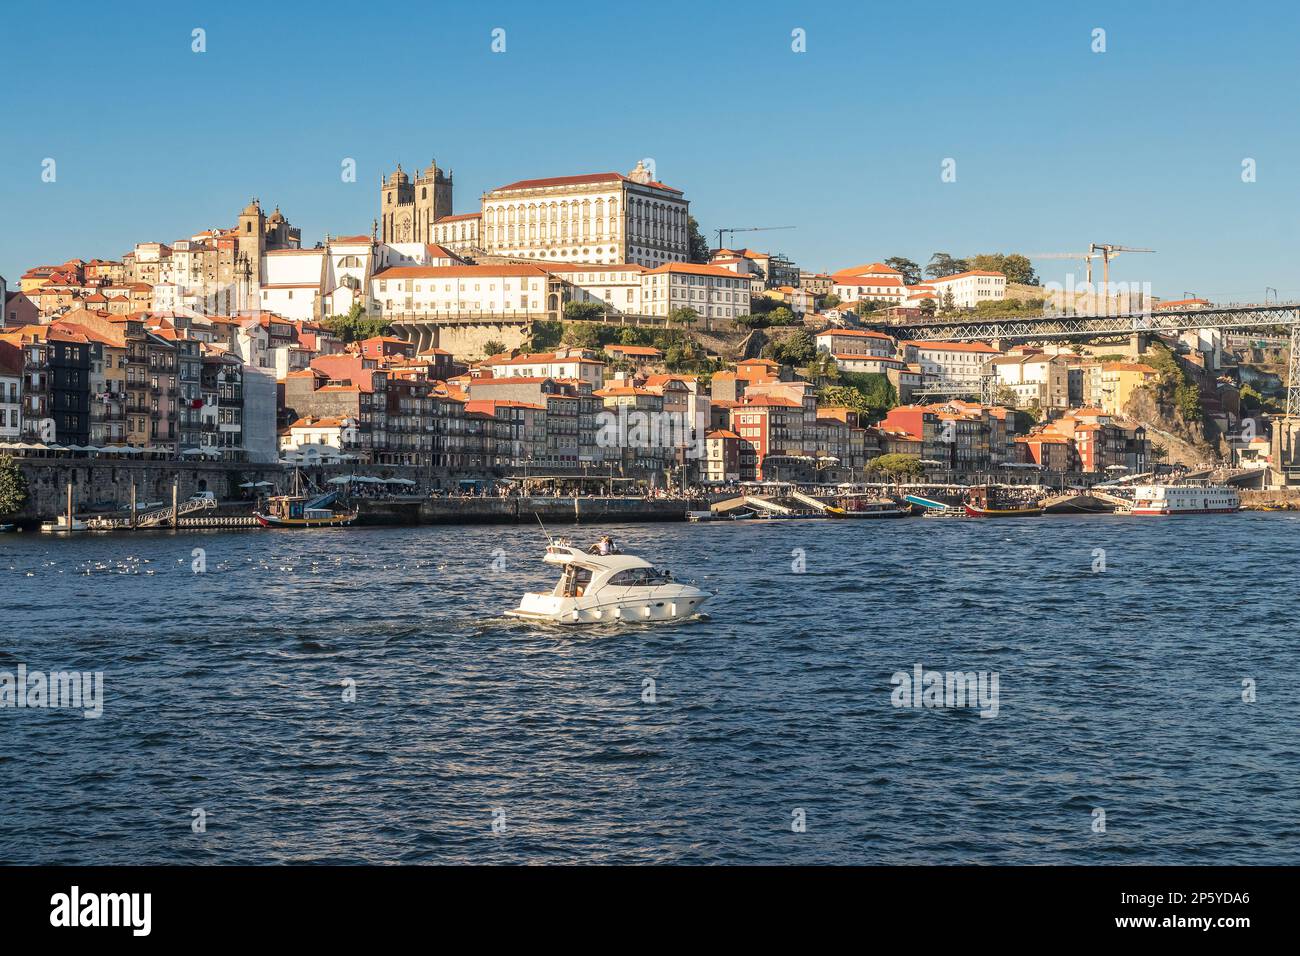 View over Porto from Vila Nova de Gaia, with the Douro River in the foreground and the riverside pier, the houses and the Cathedral in the background, Stock Photo